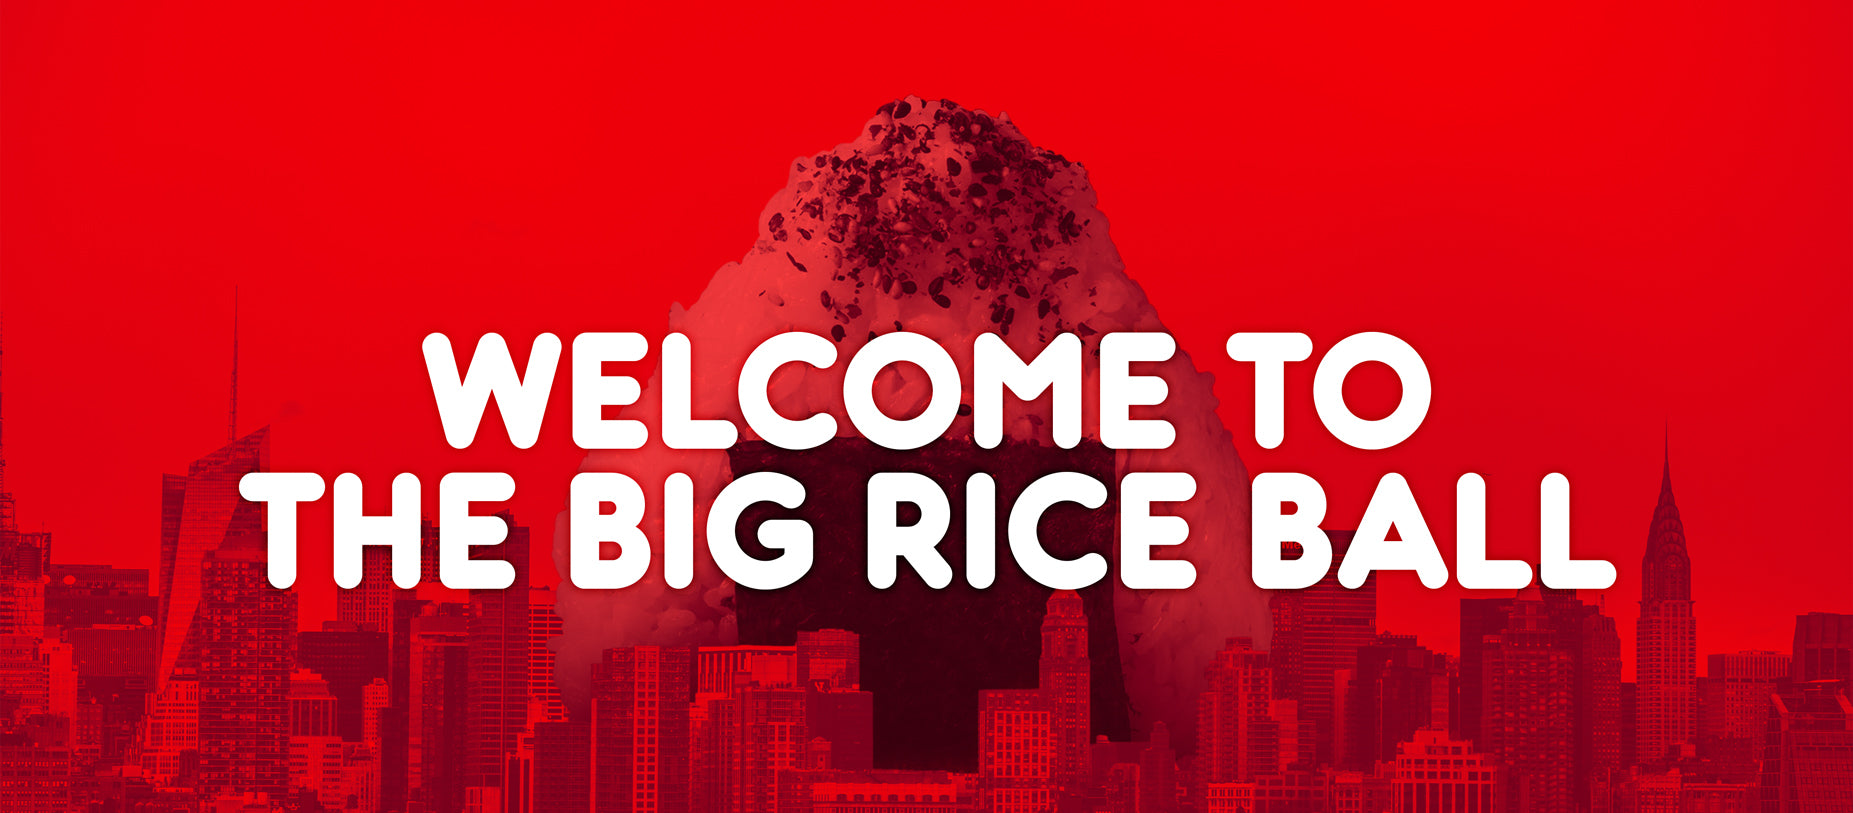 Welcome to The Big Rice Ball